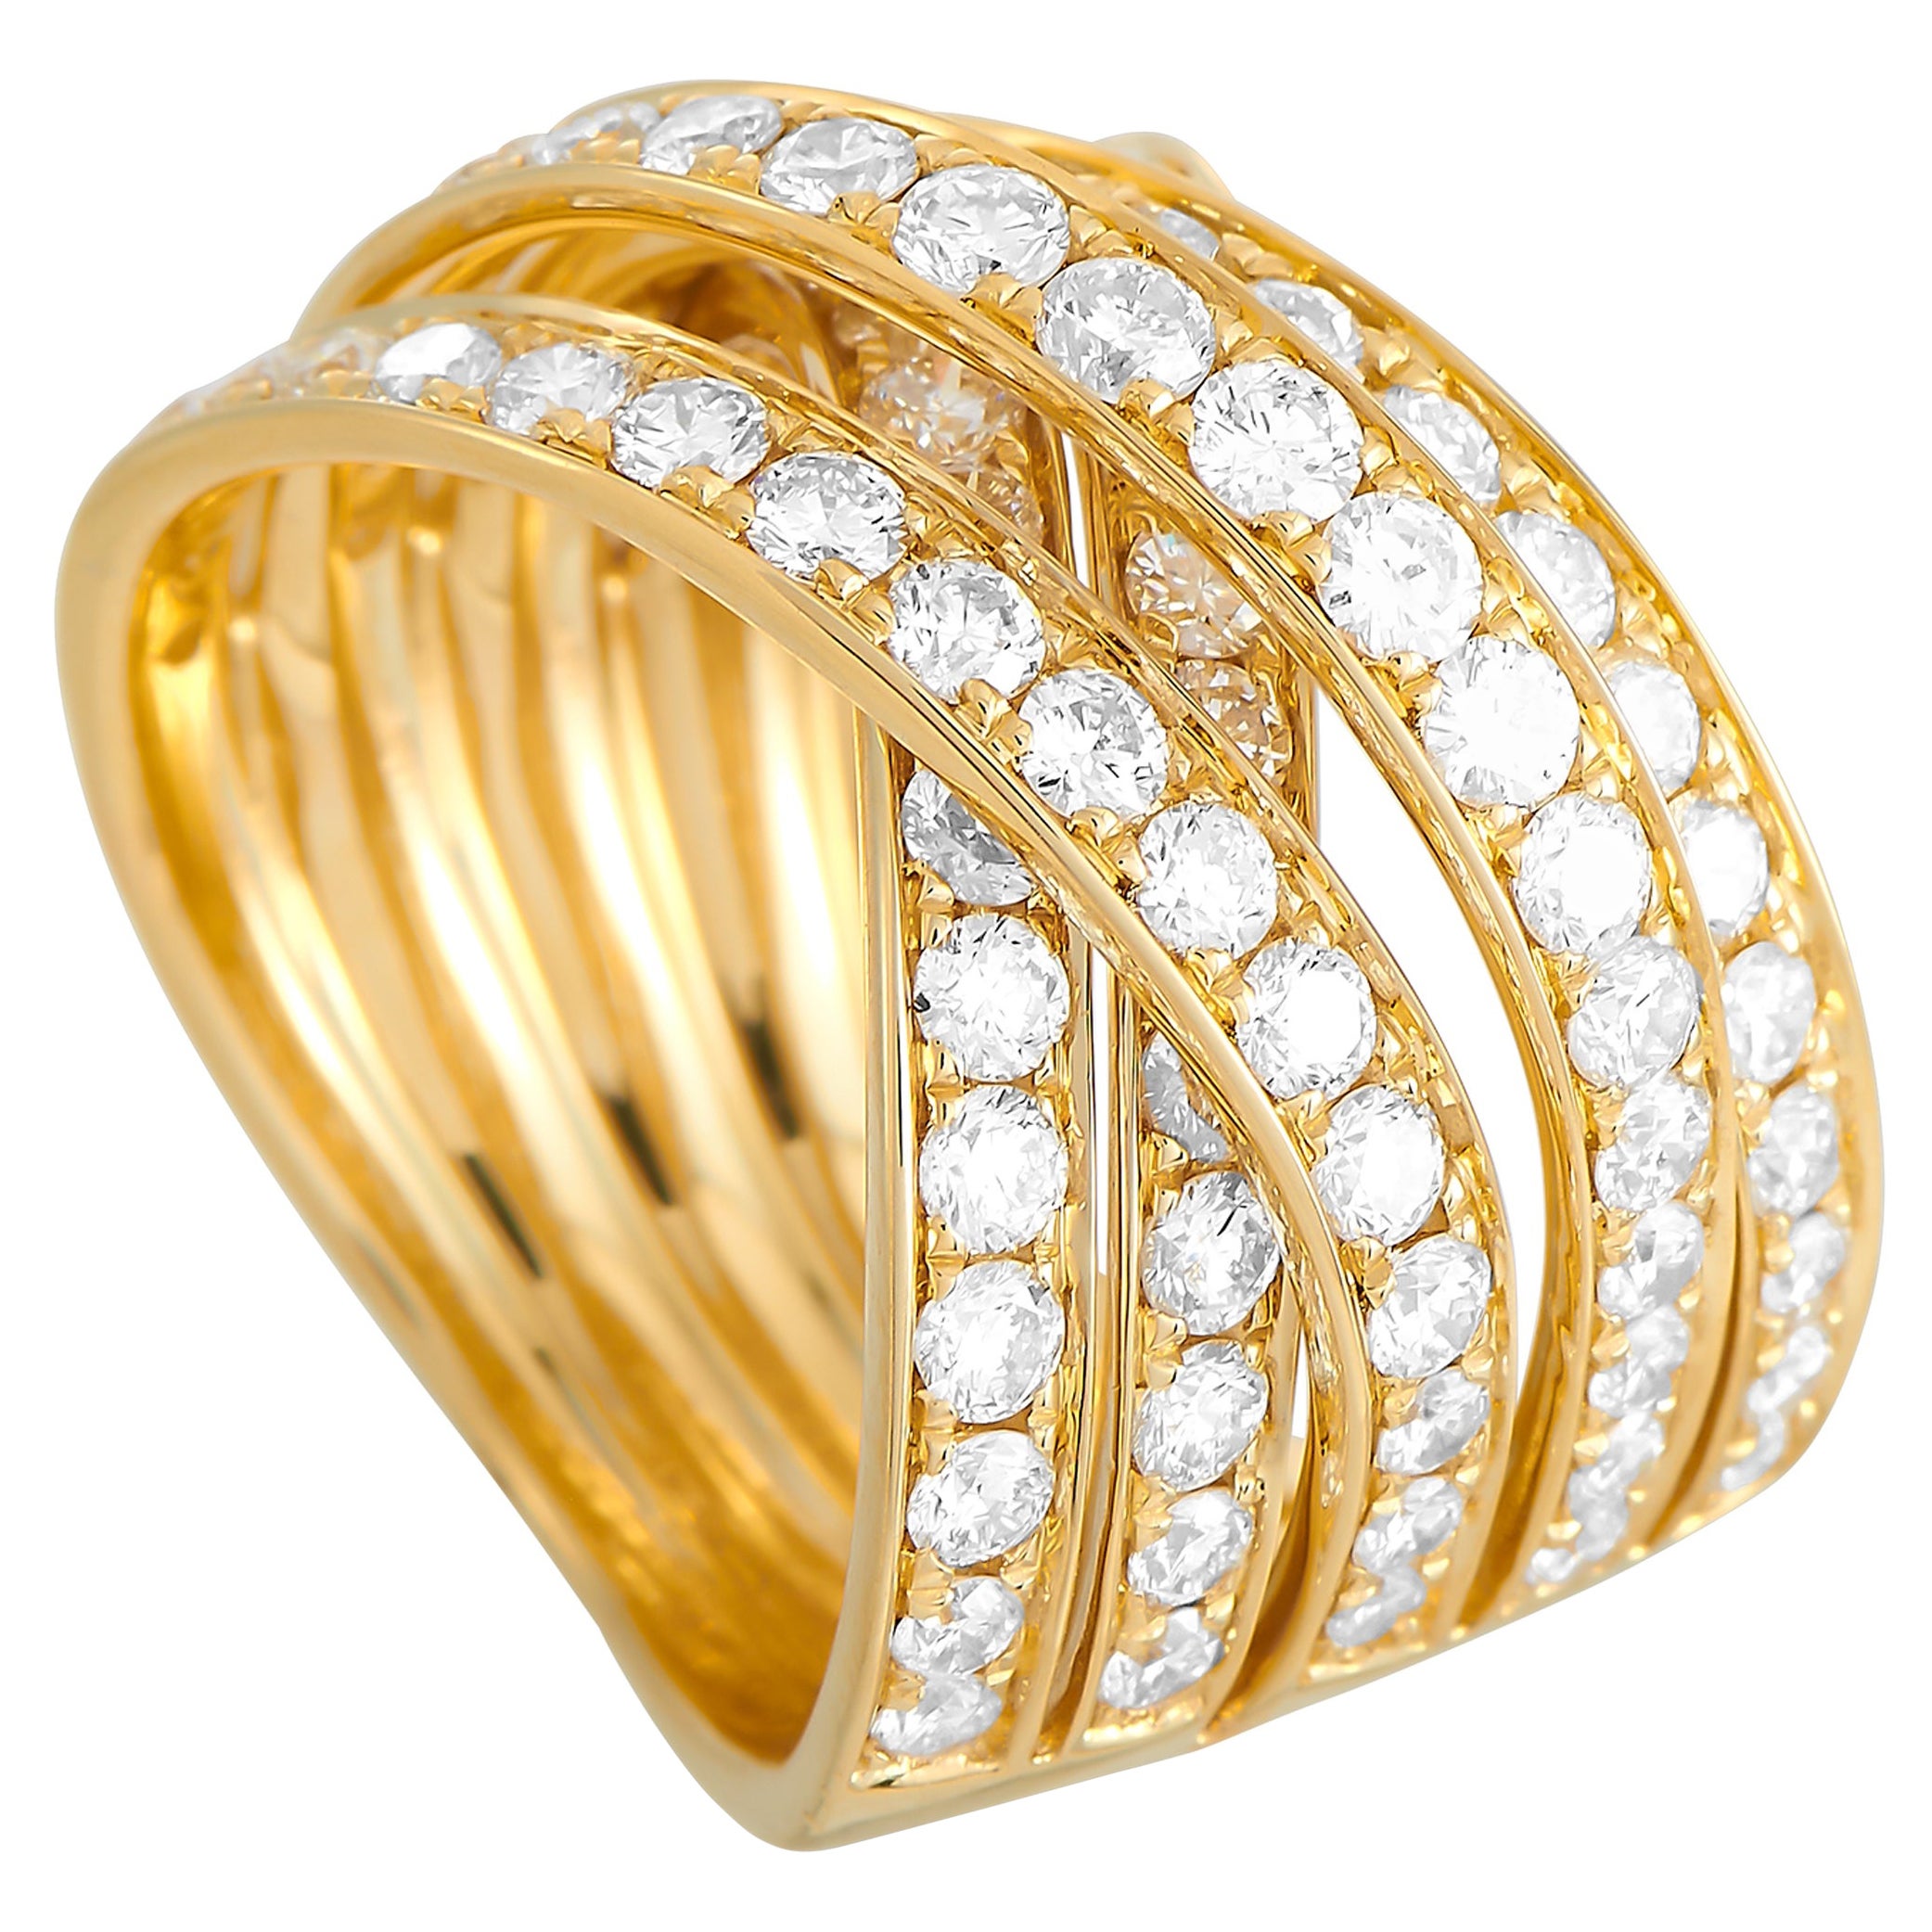 LB Exclusive 18K Yellow Gold 2.75 Ct Diamond Crossover Ring